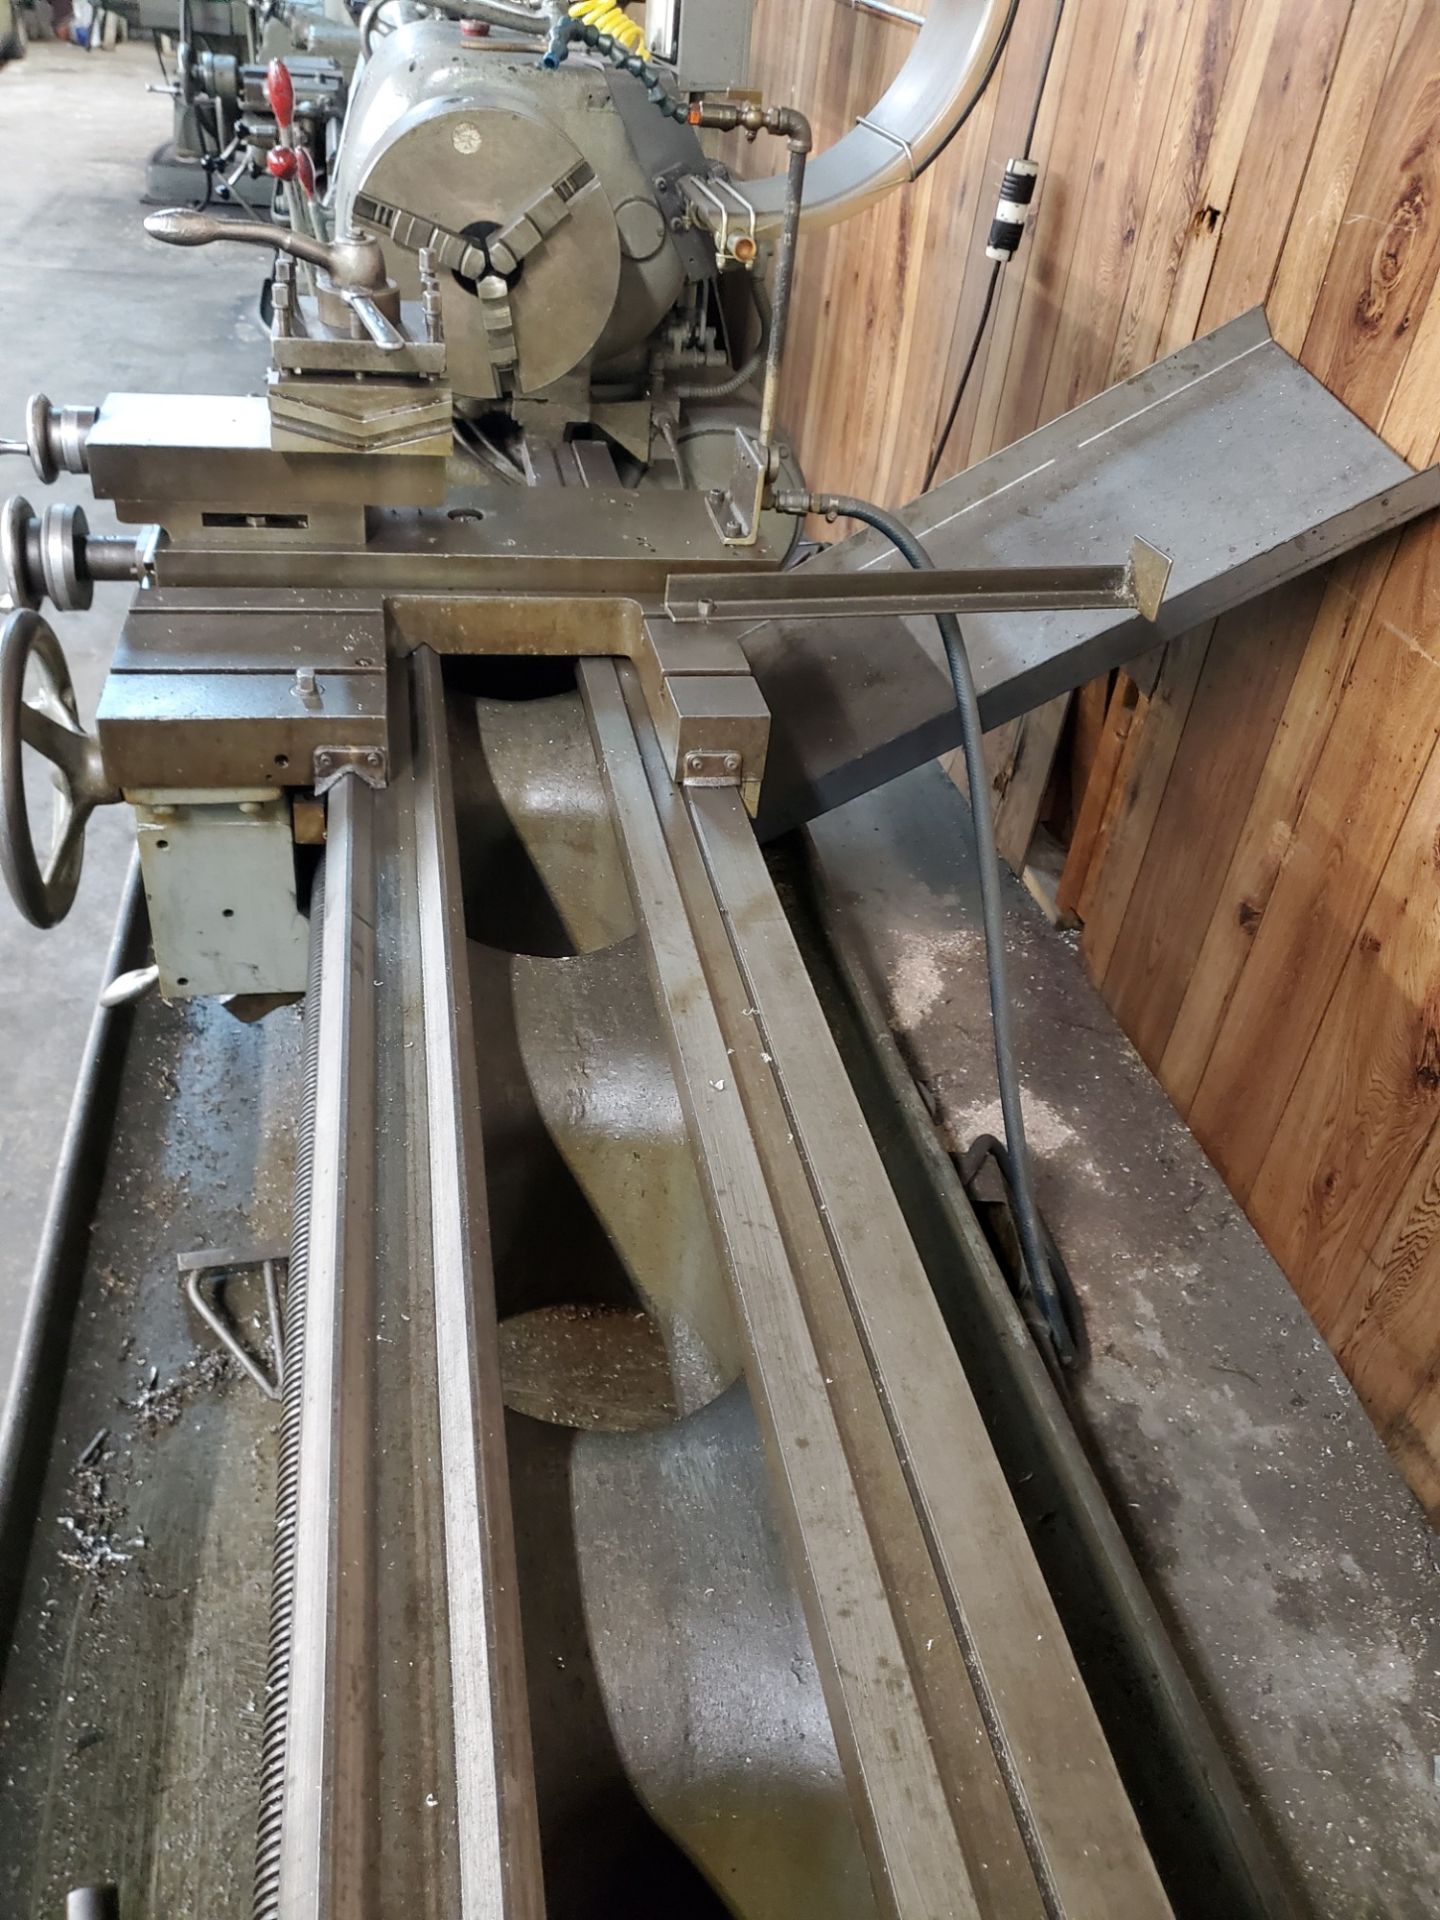 Colchester Mascot 8-1/2 16" x 80" Gap Bed Lathe - Image 3 of 4